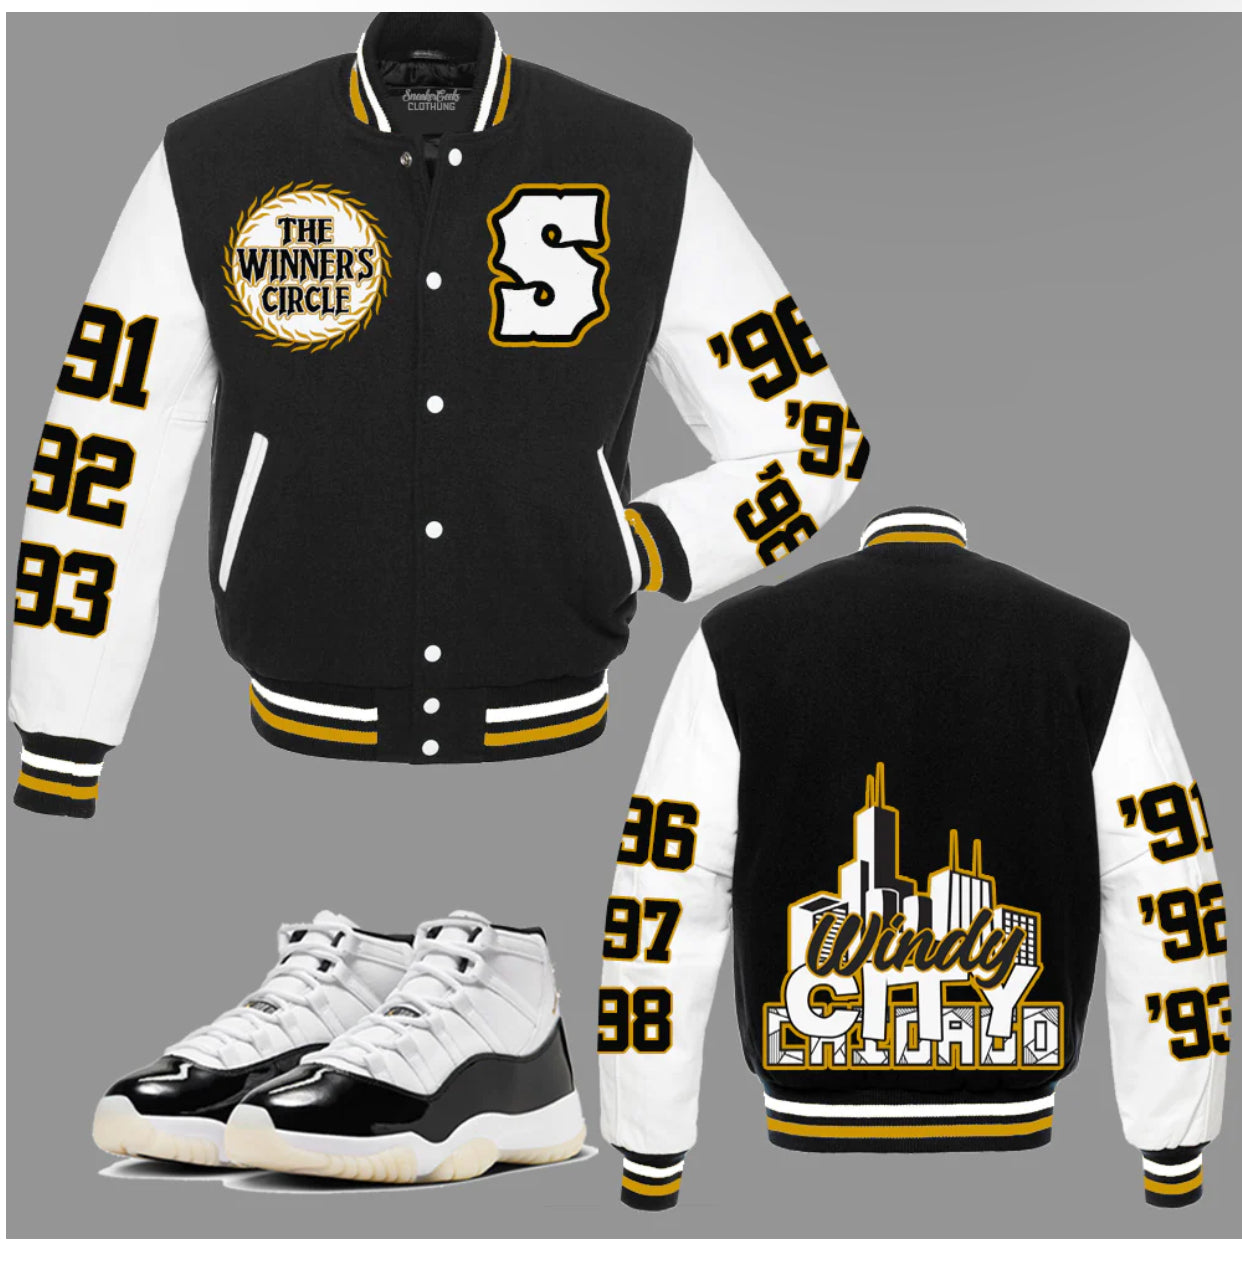 Years Of The Champs Varsity Jacket to match Retro Jordan 11 Gratitude aka DMP sneakers - In Stock